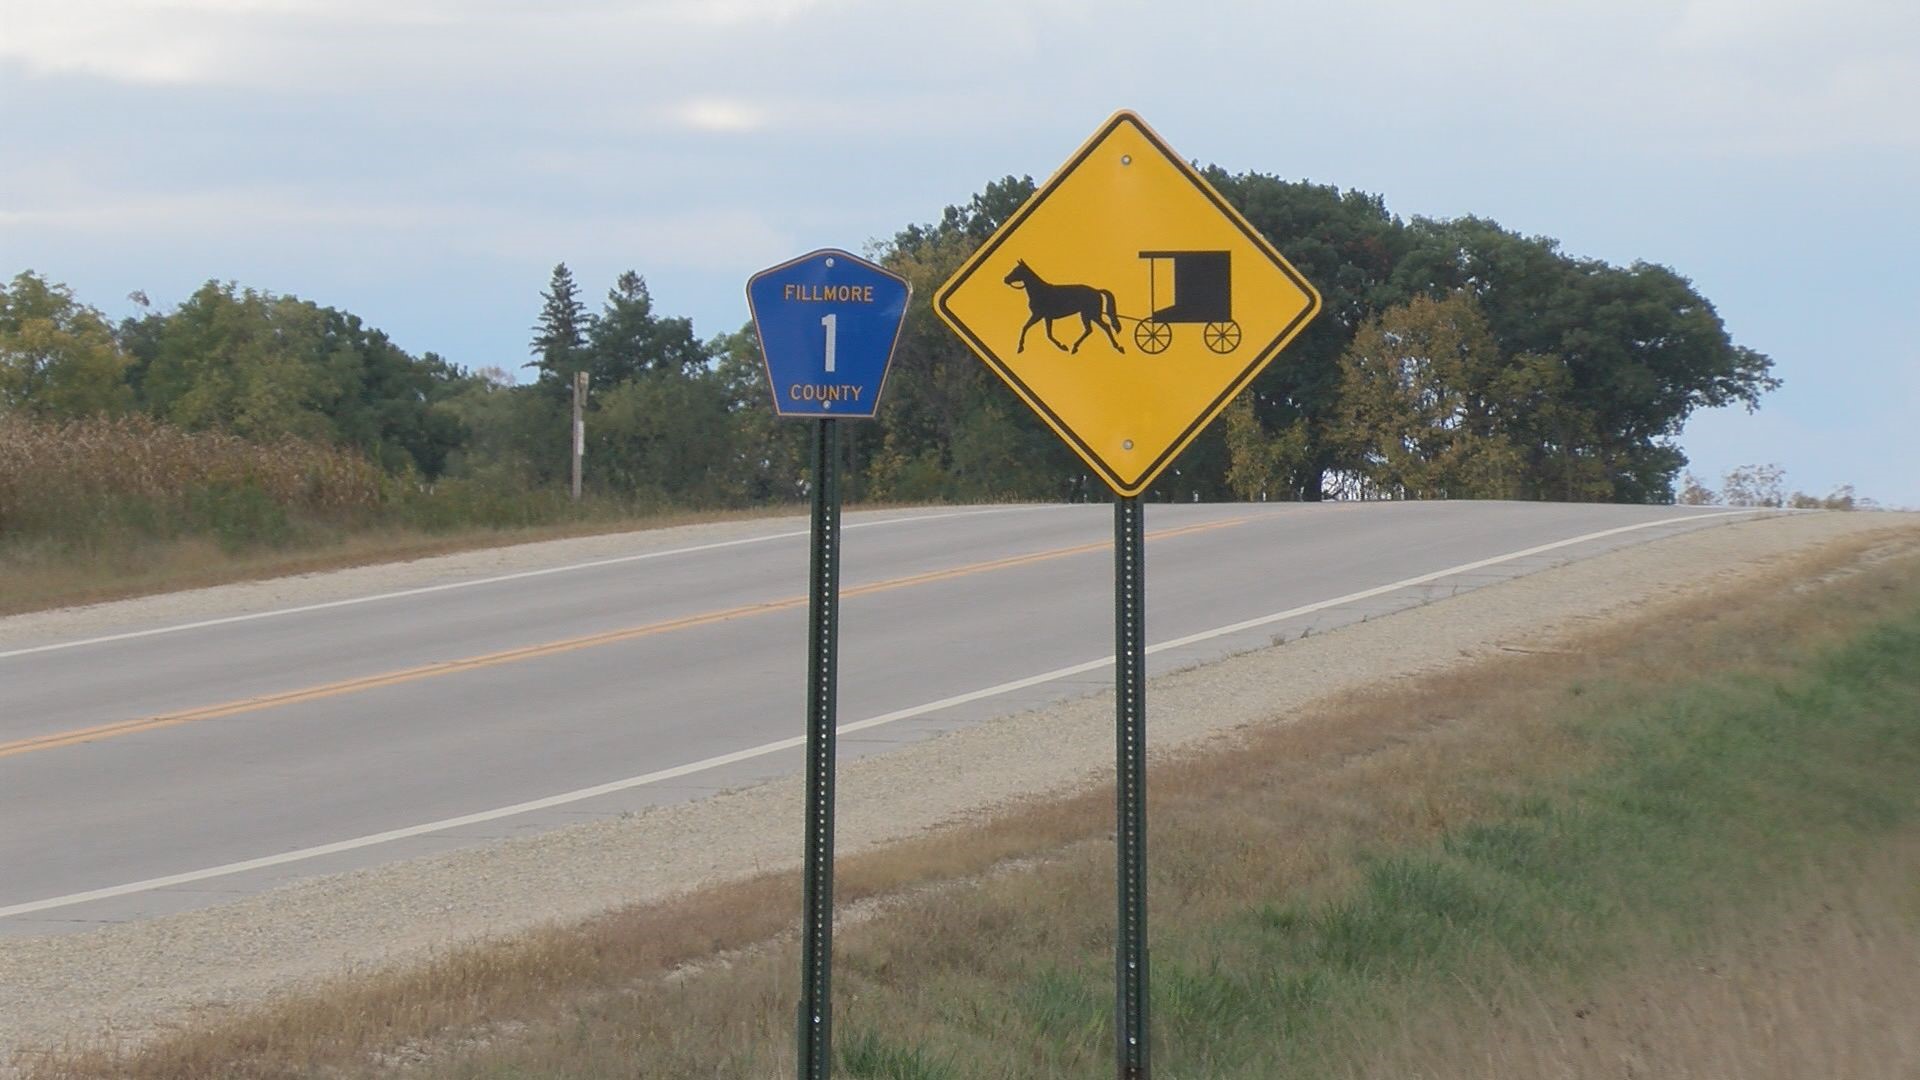 A collision between an Amish buggy and a vehicle in southeastern Minnesota claimed two lives and left two others injured.